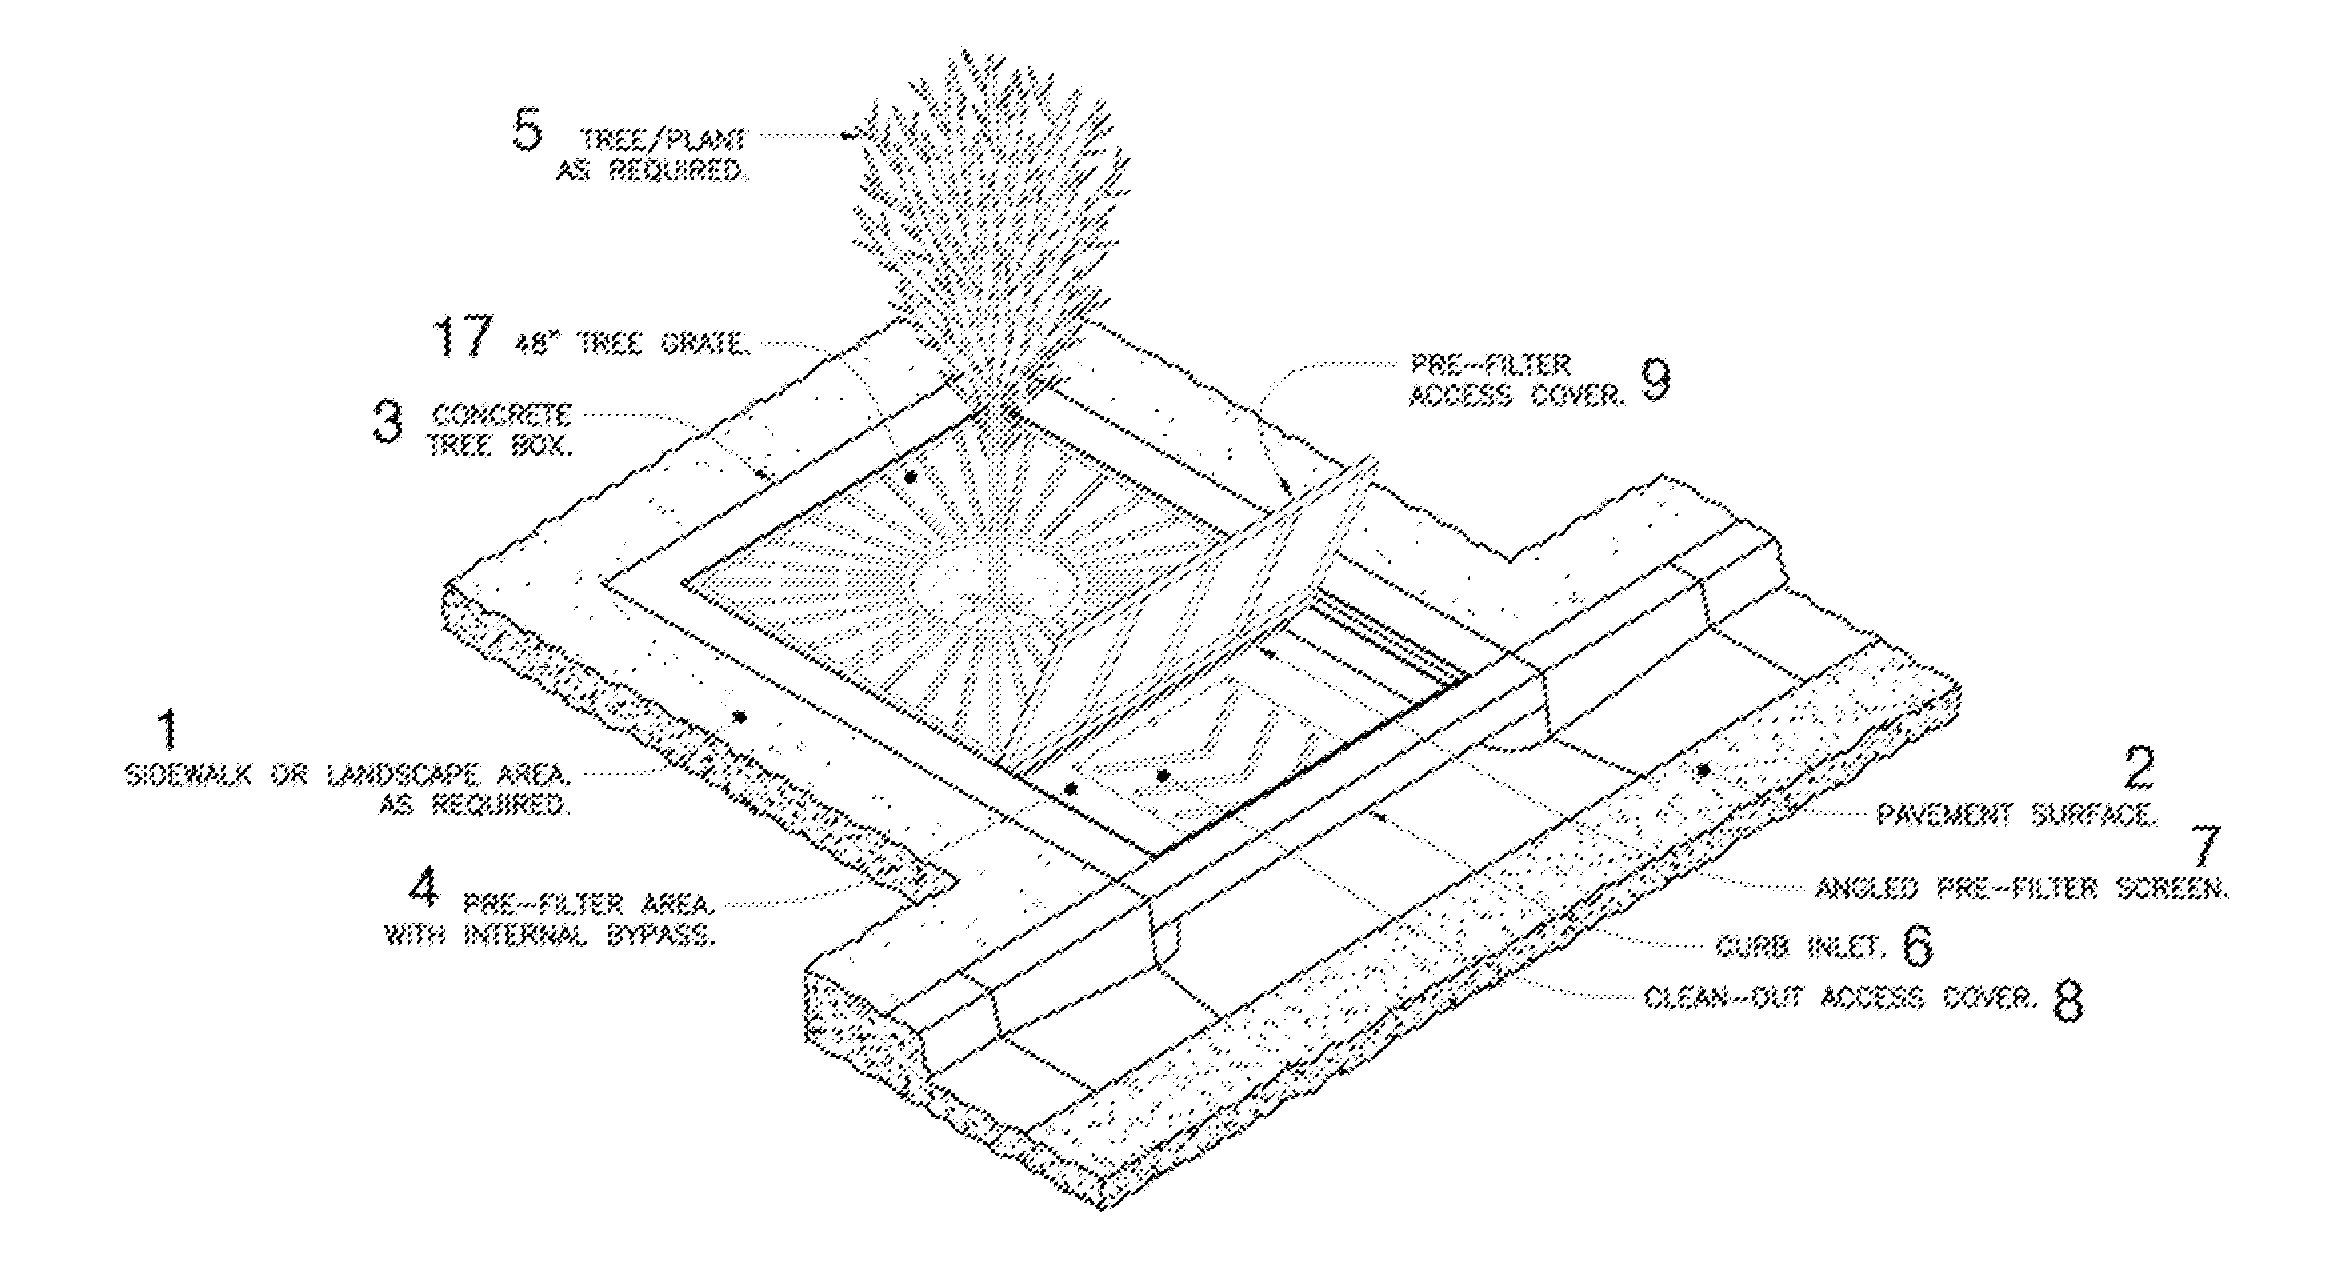 Fixture Cells for Bioretention Systems